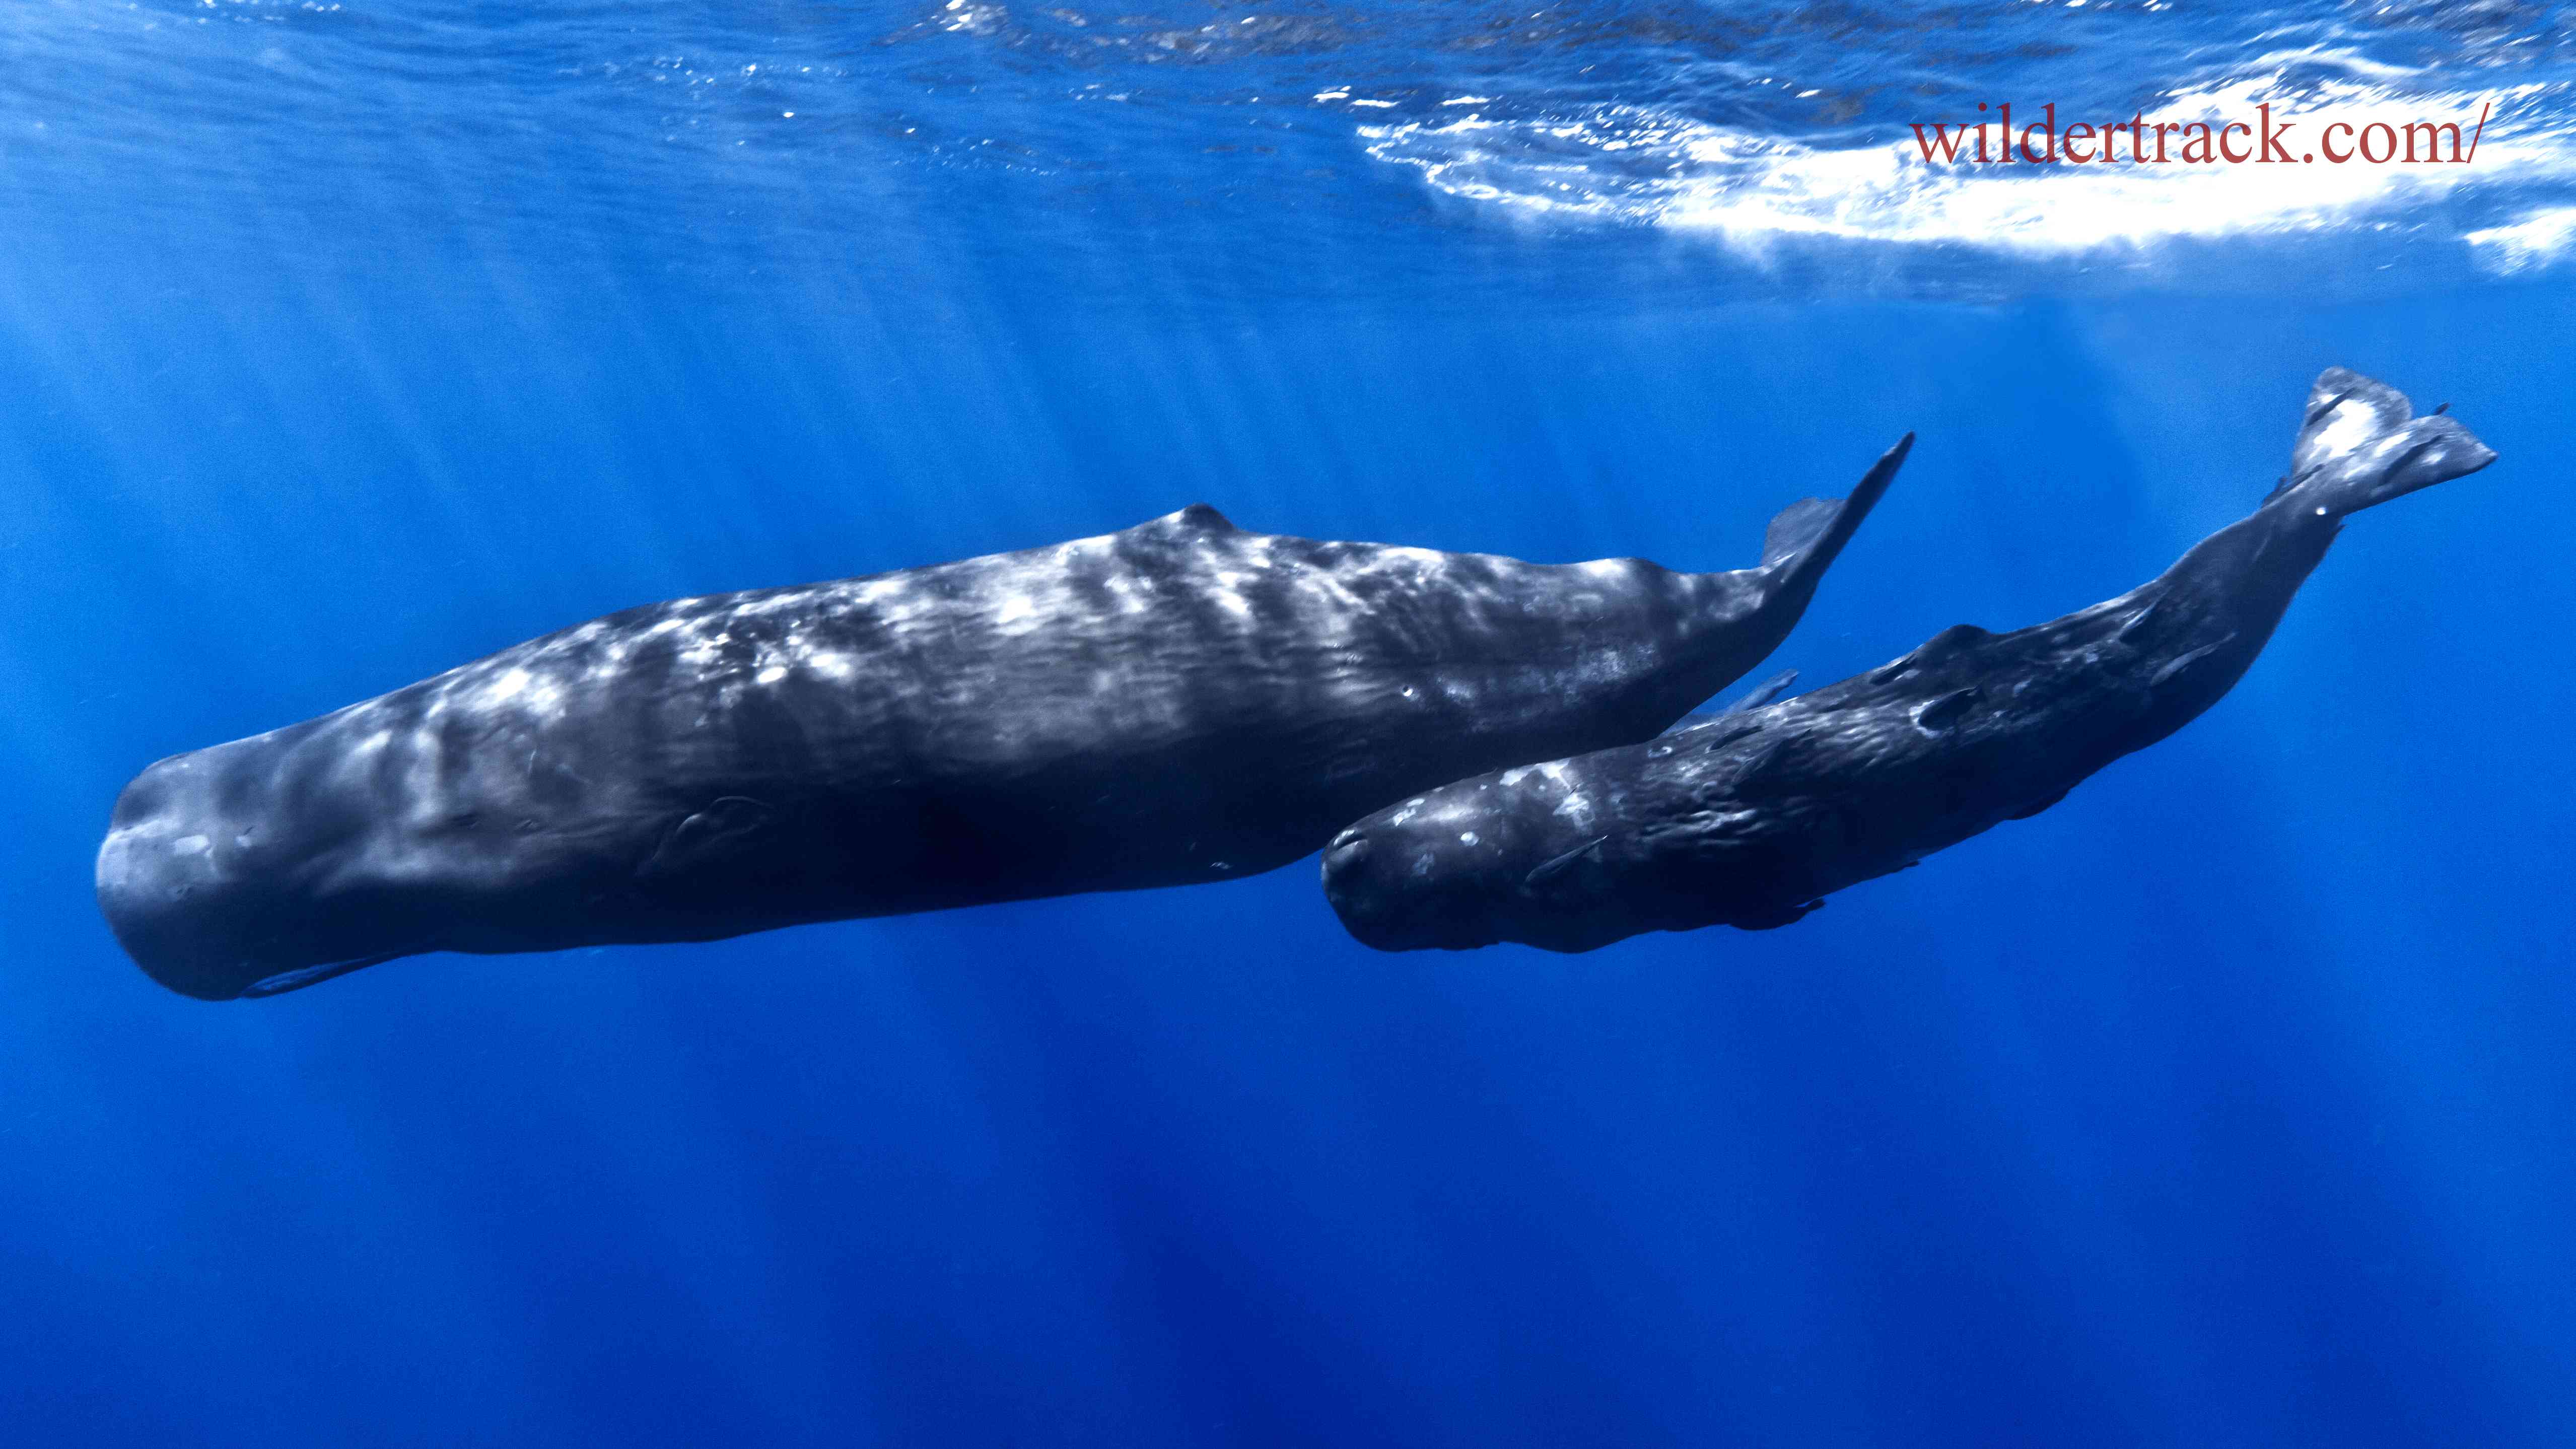 The Results: Stunning Pictures of Sperm Whales